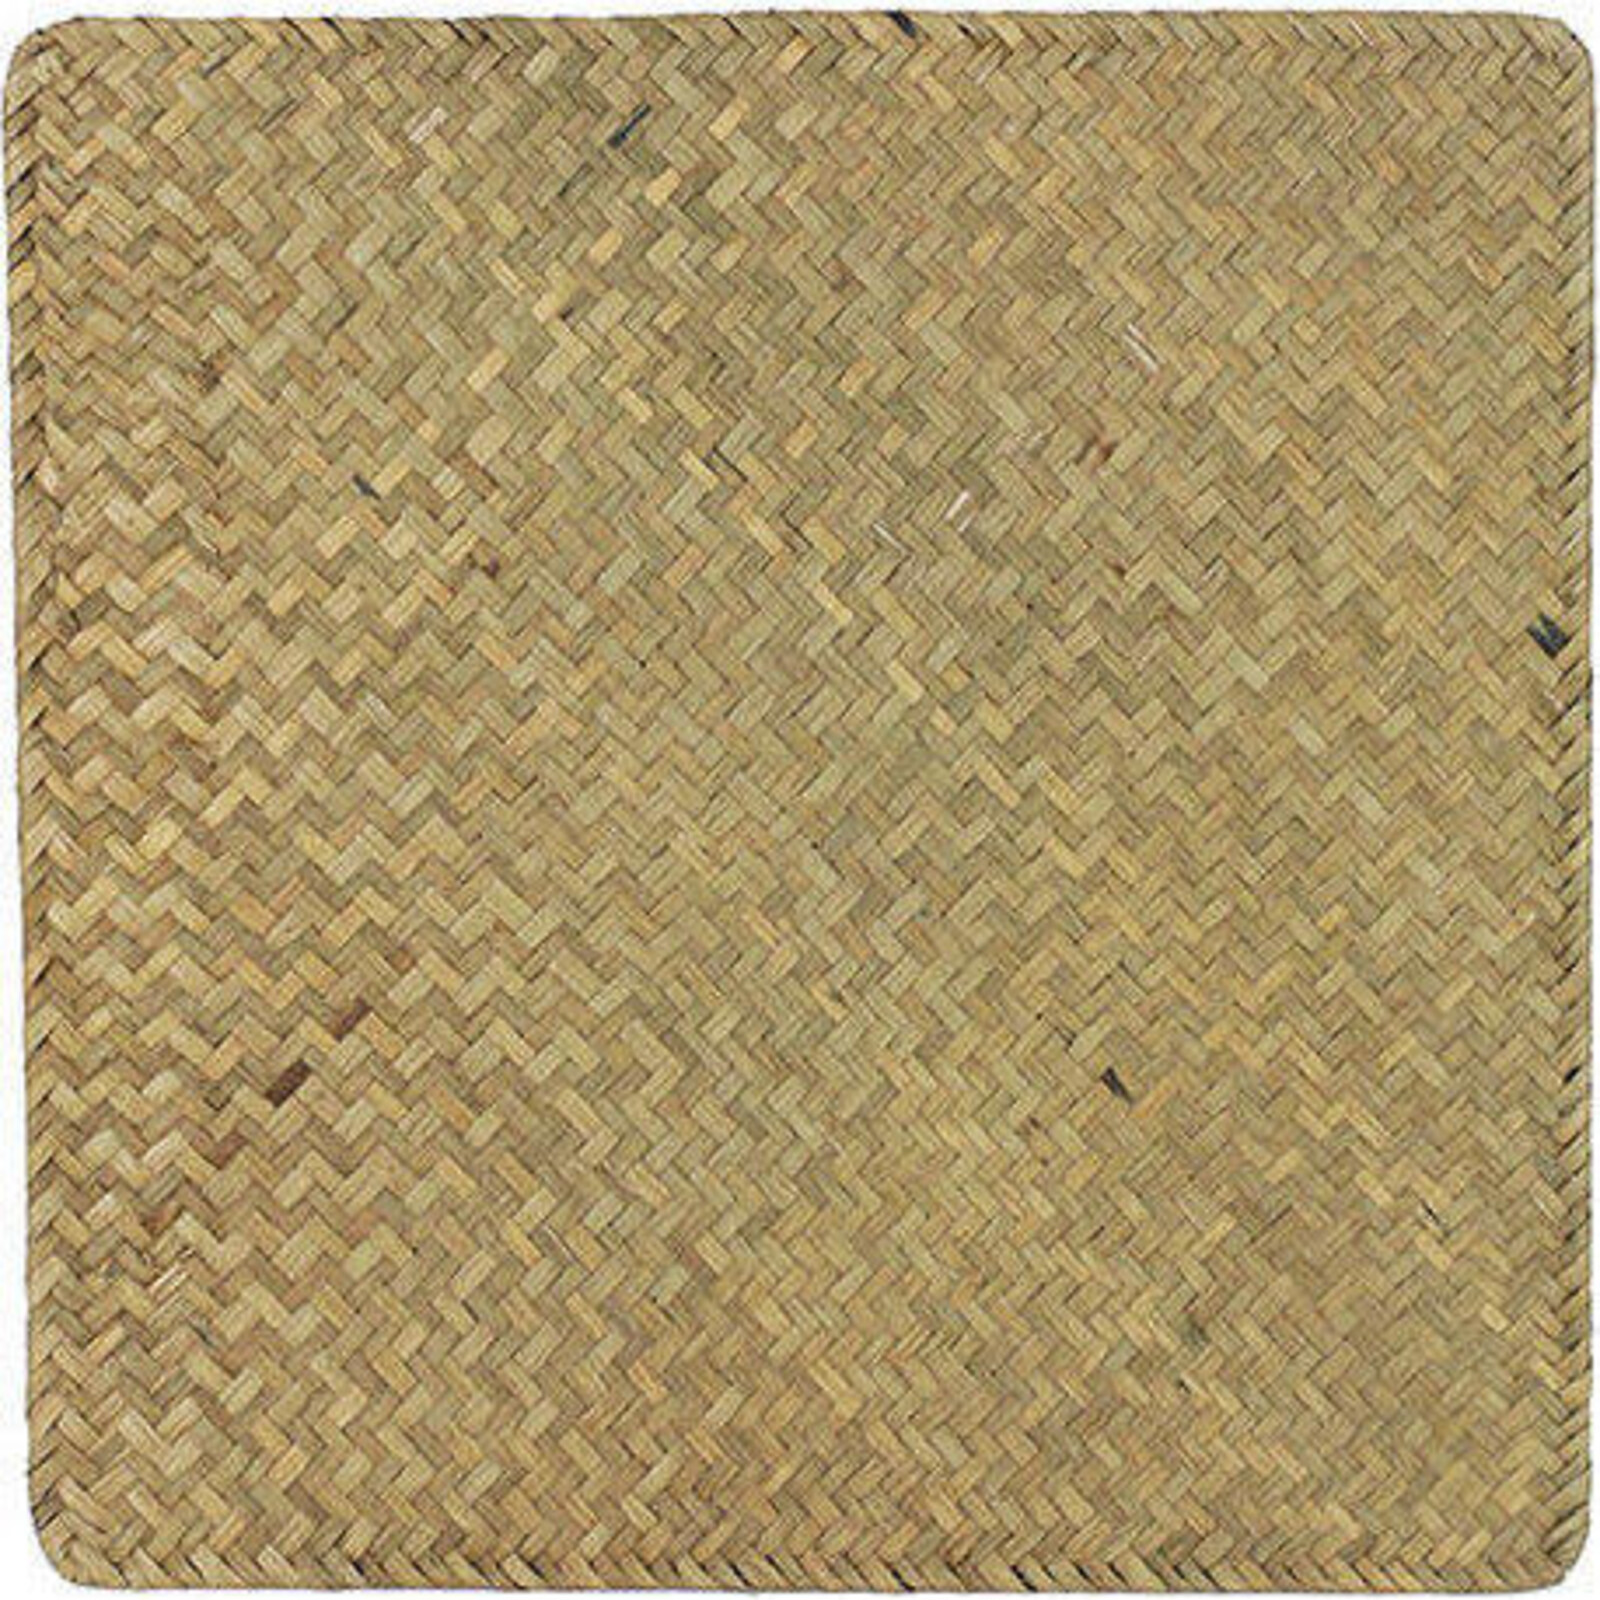 Placemat Sq Weave Natural